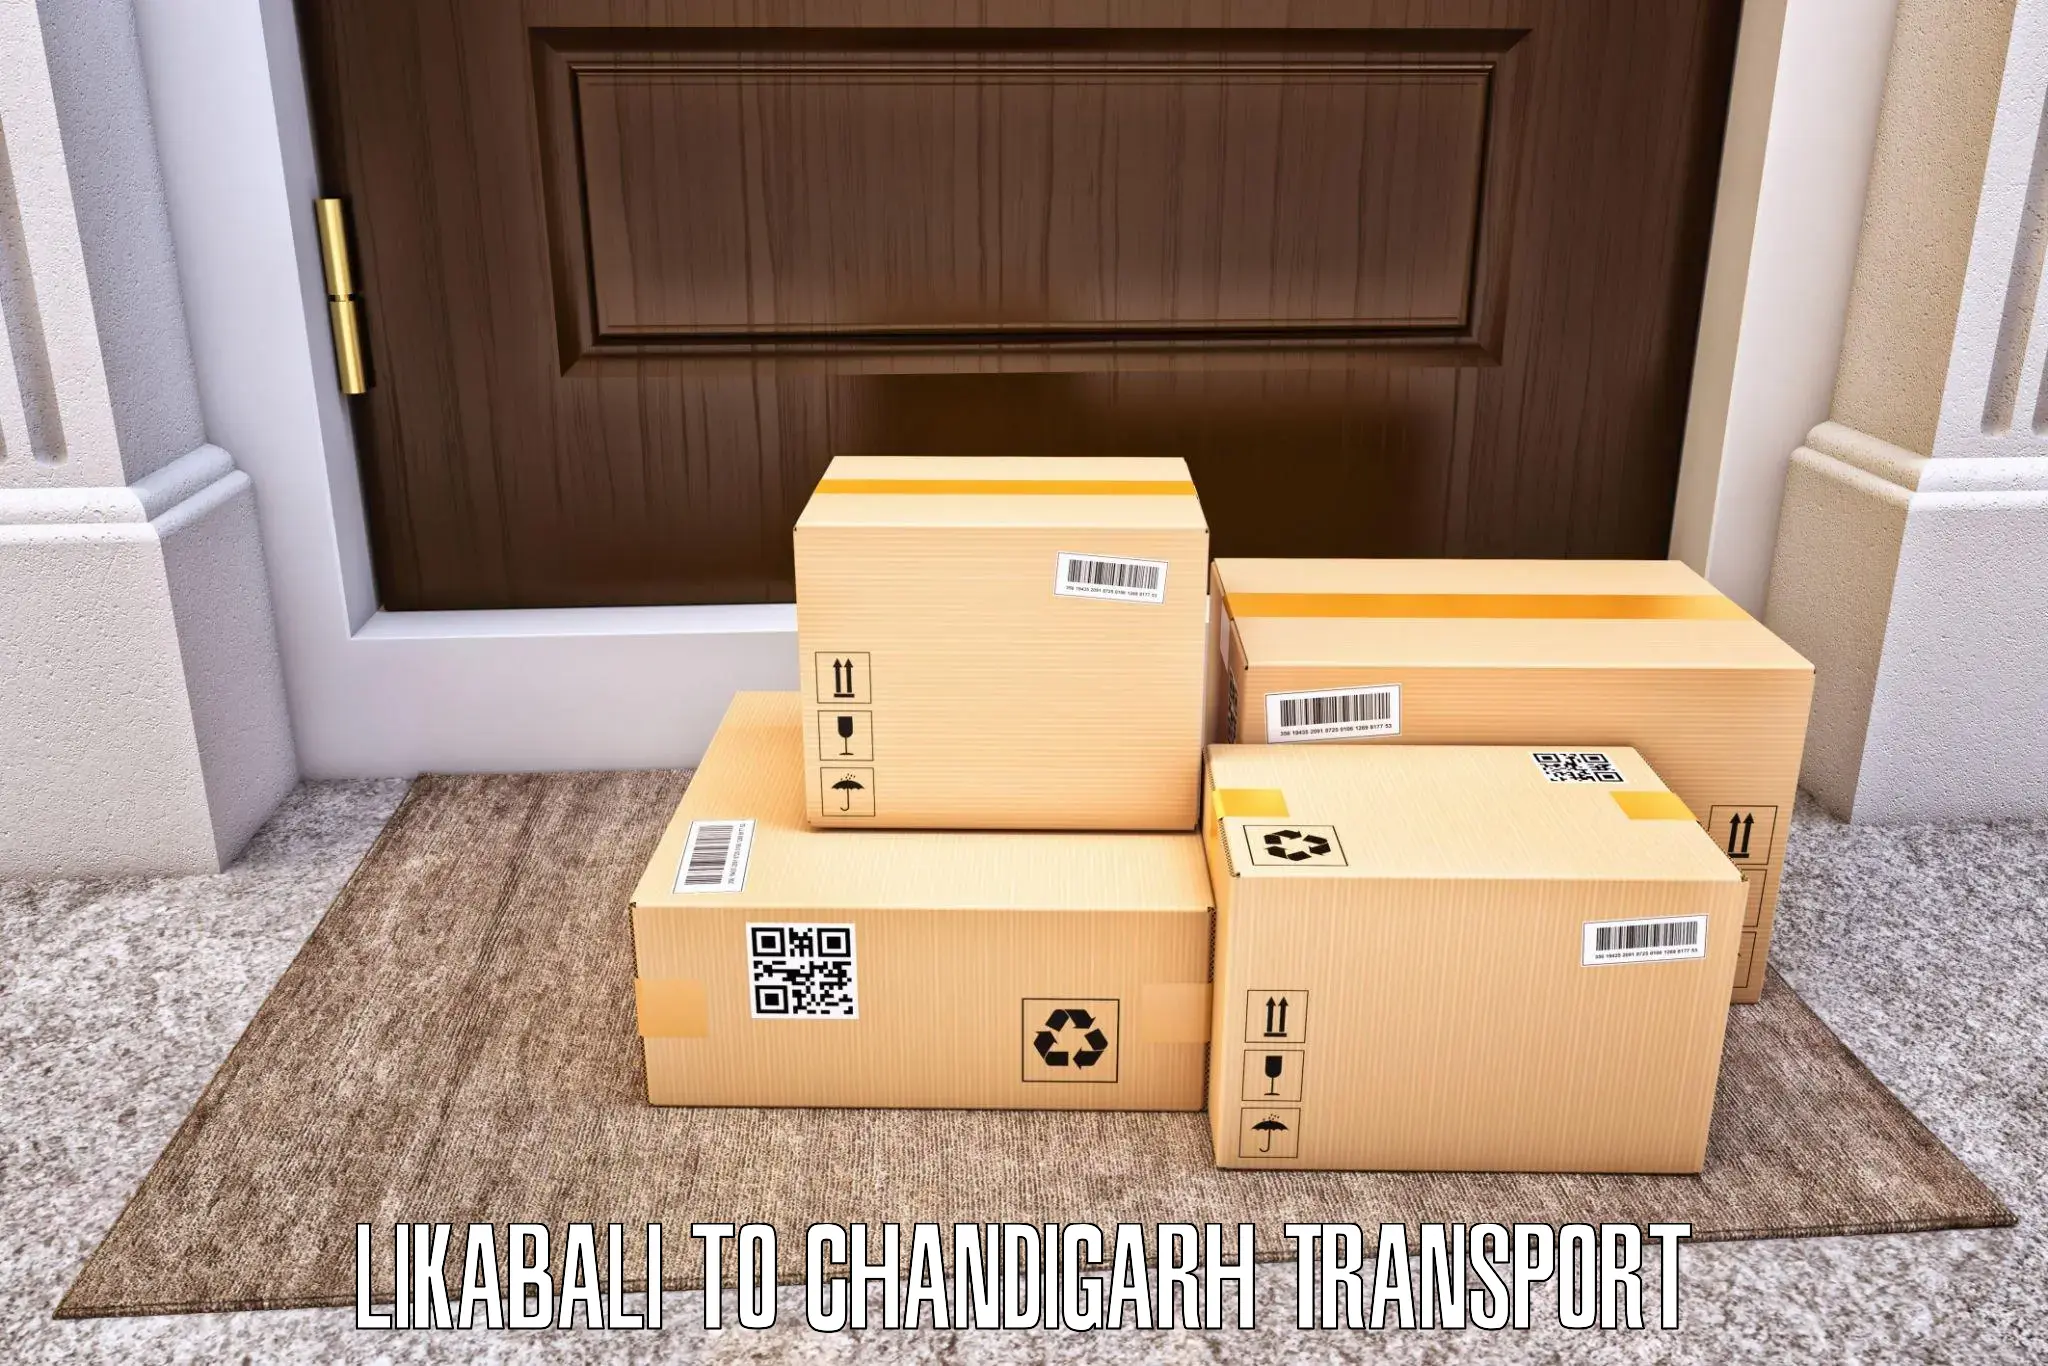 Cargo transport services Likabali to Chandigarh